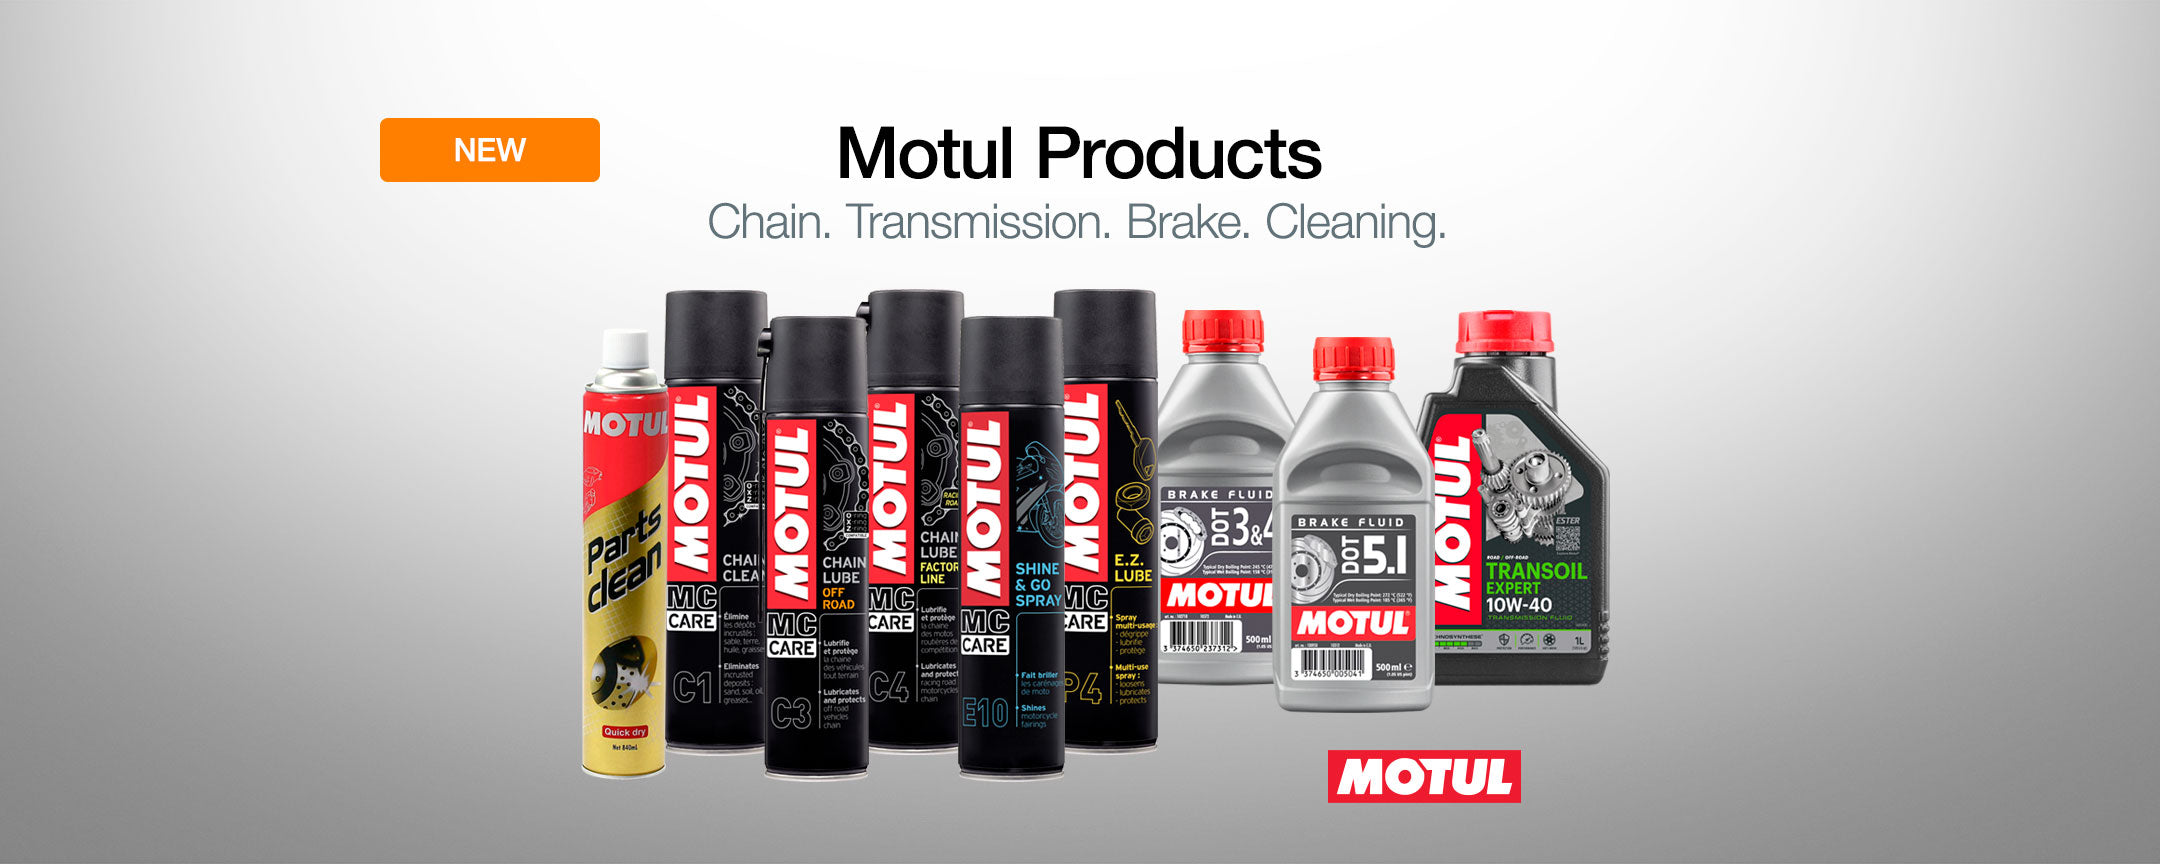 Motul Go Kart Products | Go Kart Cleaning Products | Go Kart Lubrication